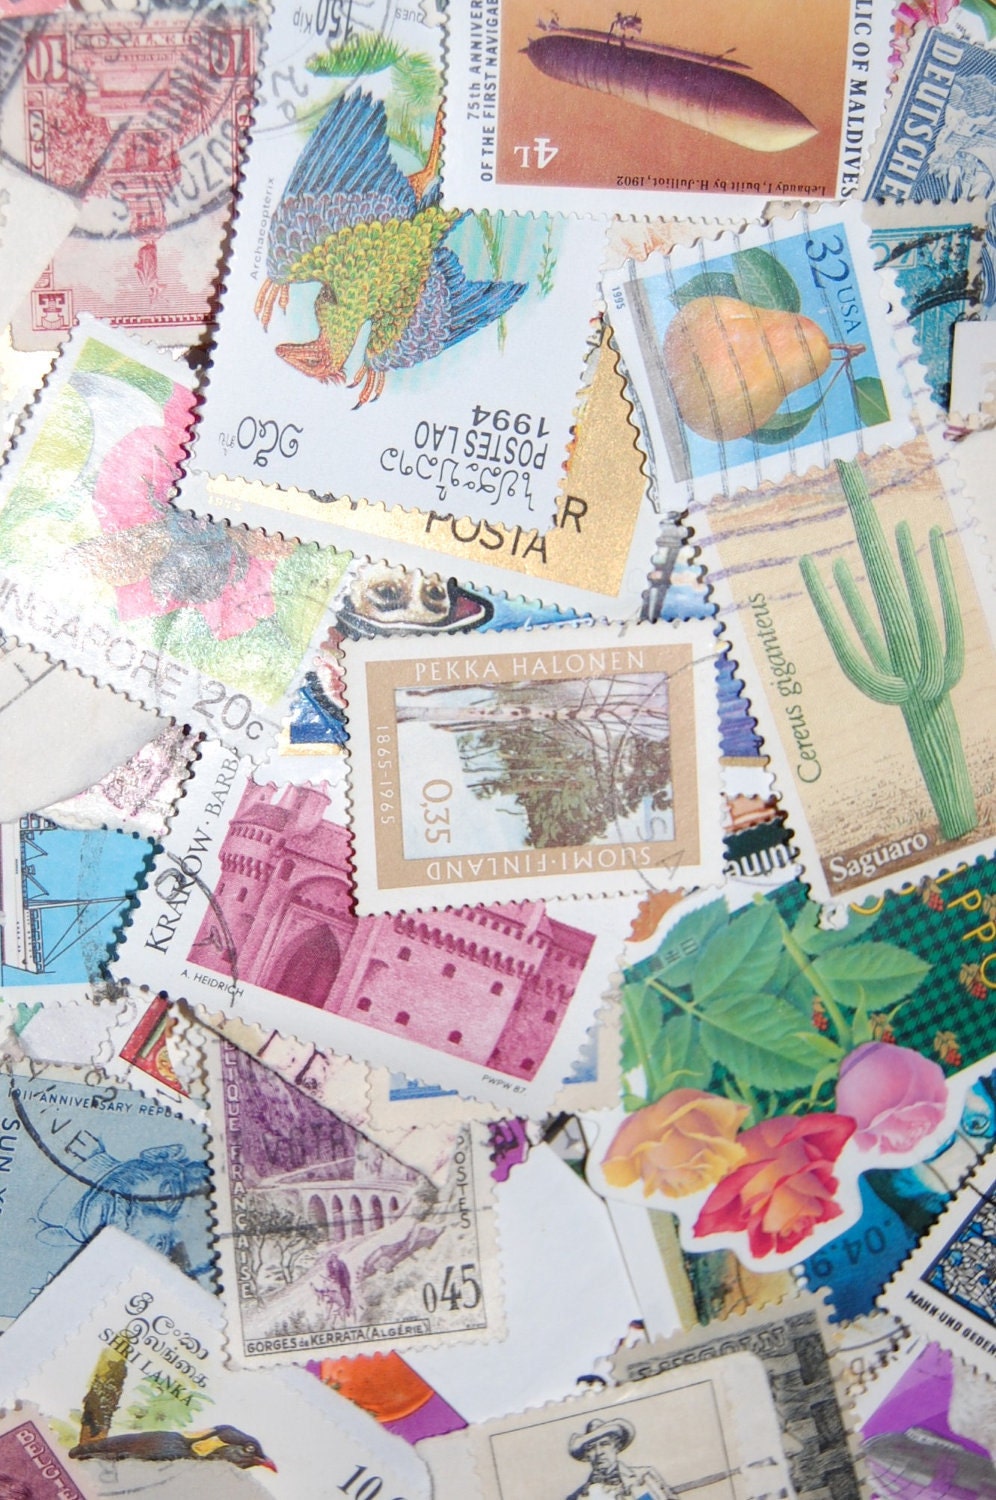 Lot of 100 Vintage US and World Wide Postage Stamps - DESTASH Great for scrapbooking, mixed media and other diy projects